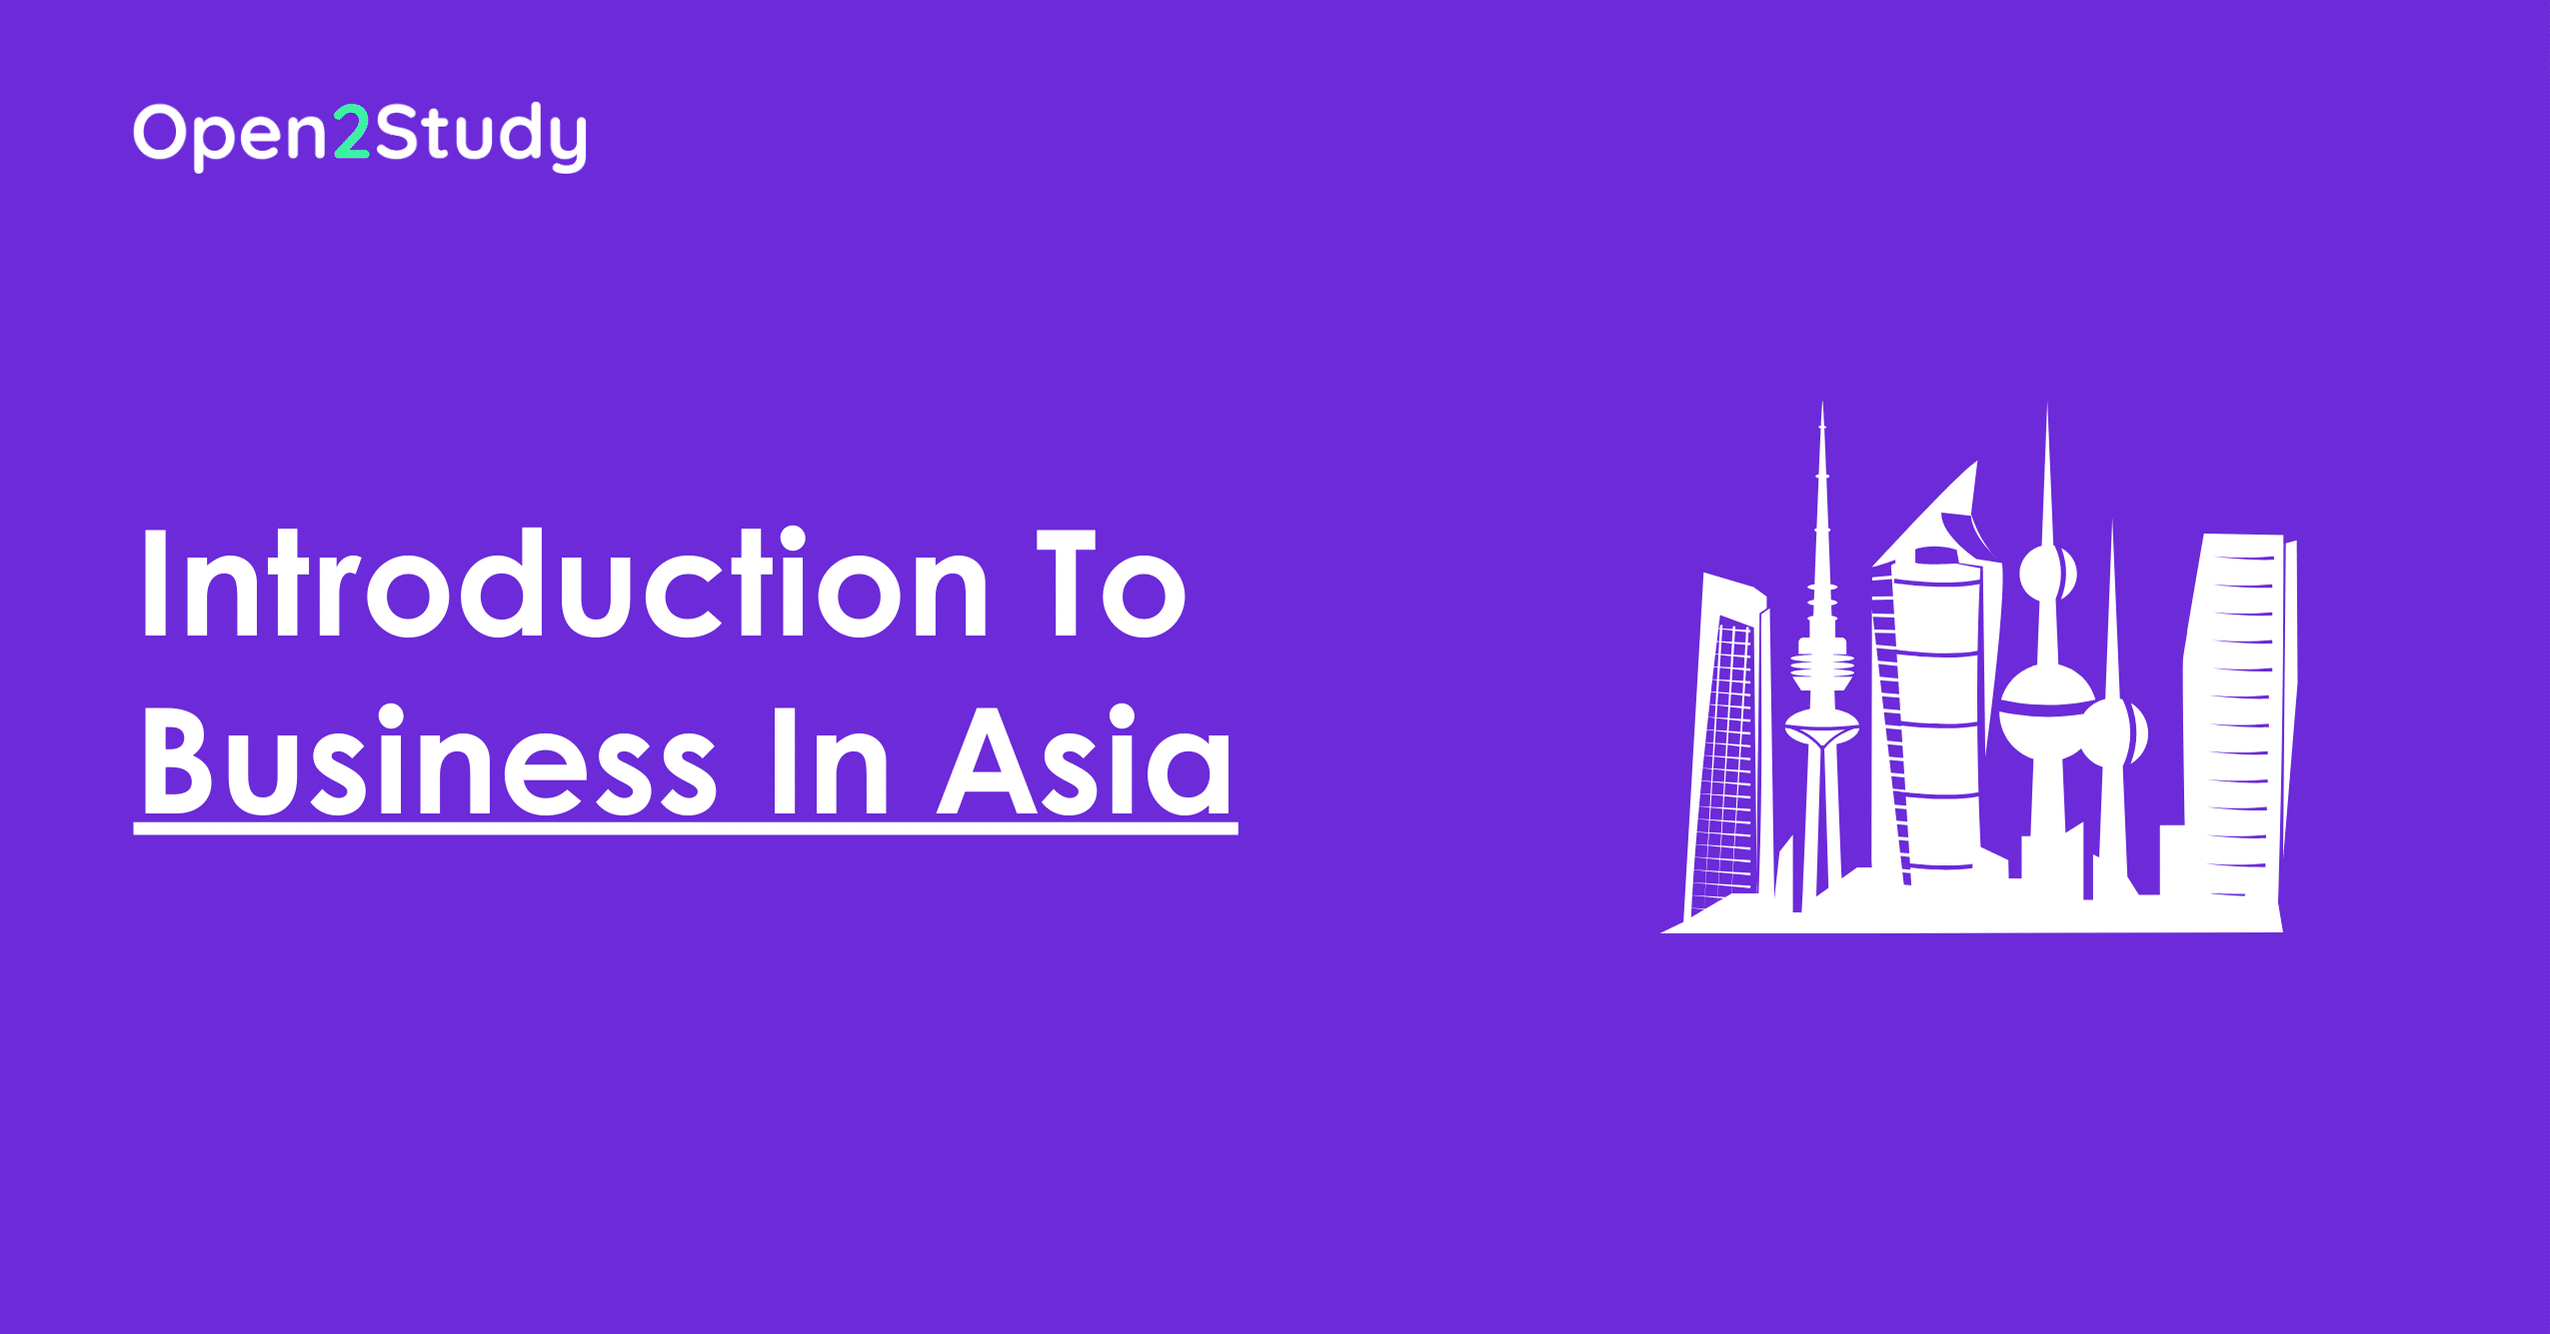 Introduction To Business In Asia